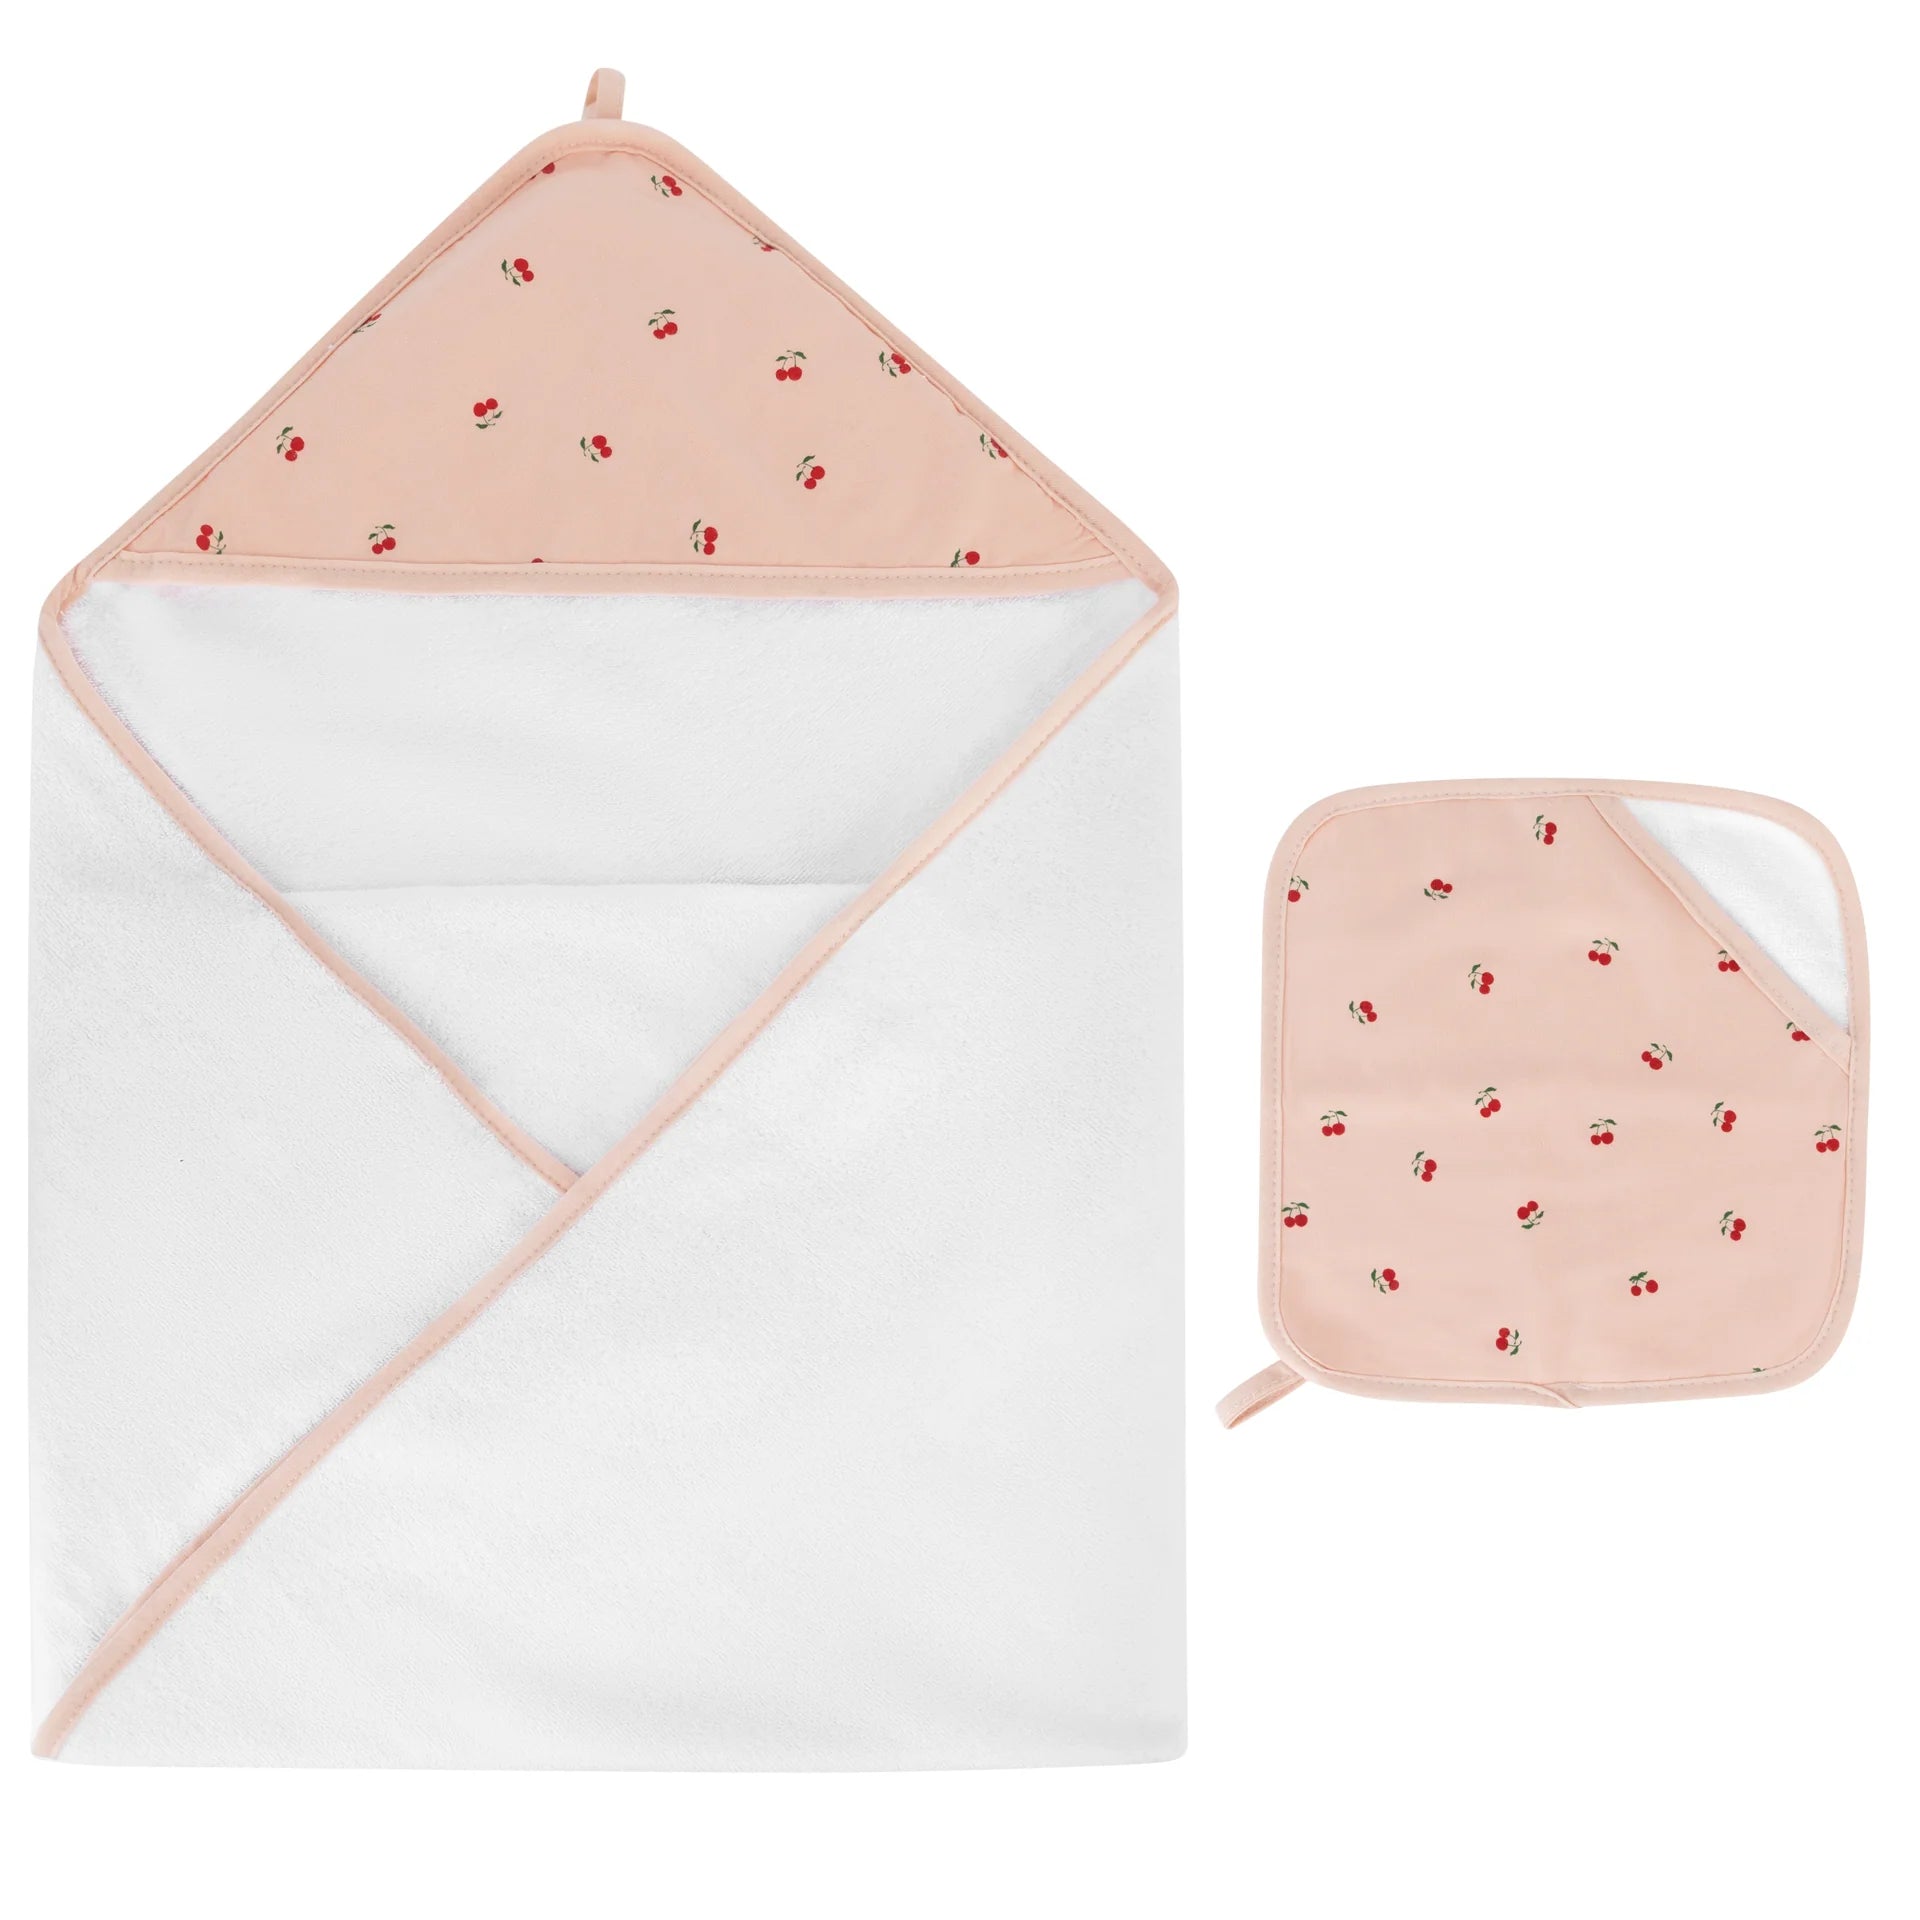 Ely's & Co Cherry Hooded Towel & Washcloth Set